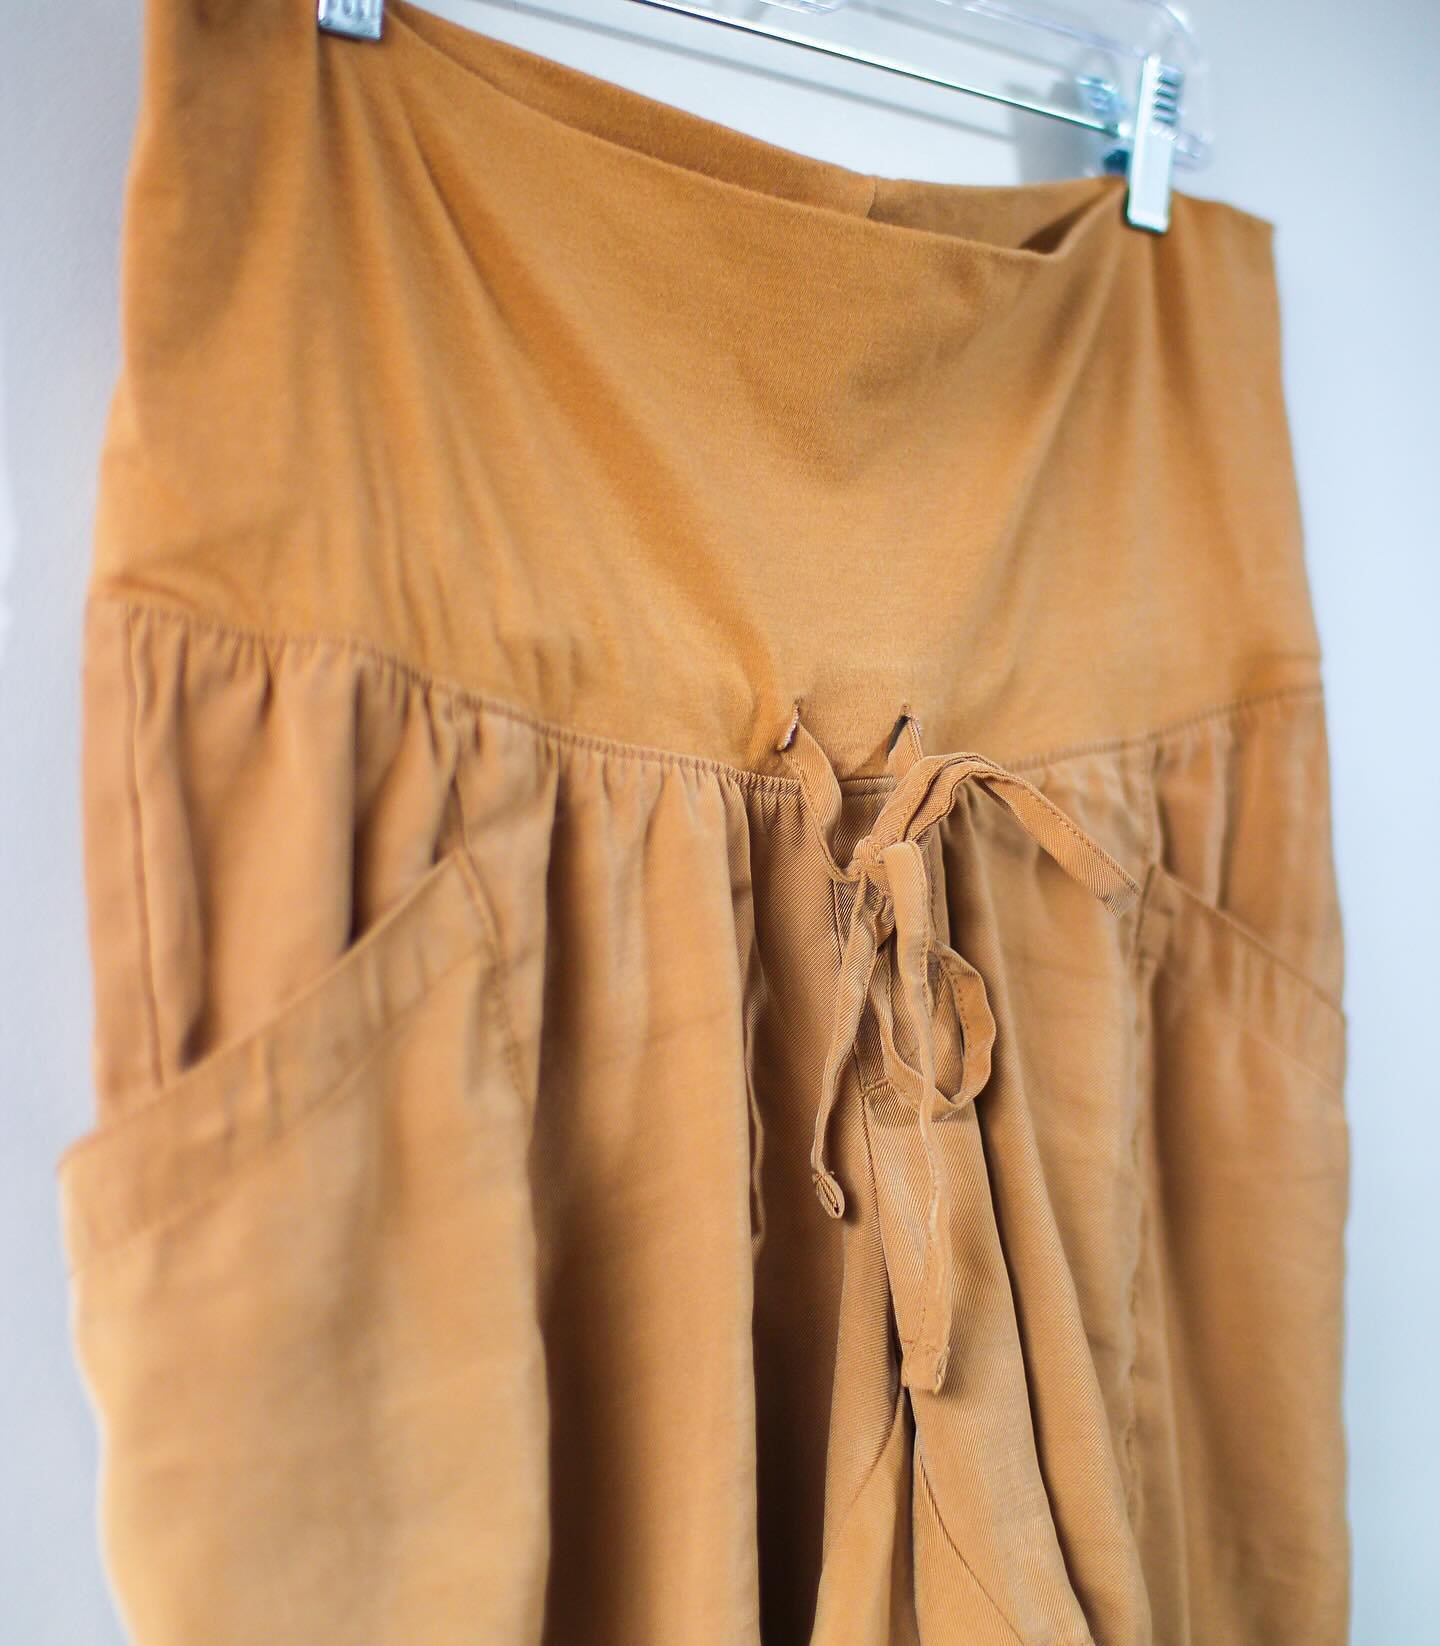 Lots of shorts in stock already, and new ones, like this pair, coming in hot! 

🤩These are Old Navy Maternity shorts in size Medium.

The colour is super easy to pair, they&rsquo;re EXTREMELY soft to the touch (velvety soft), functional side pockets